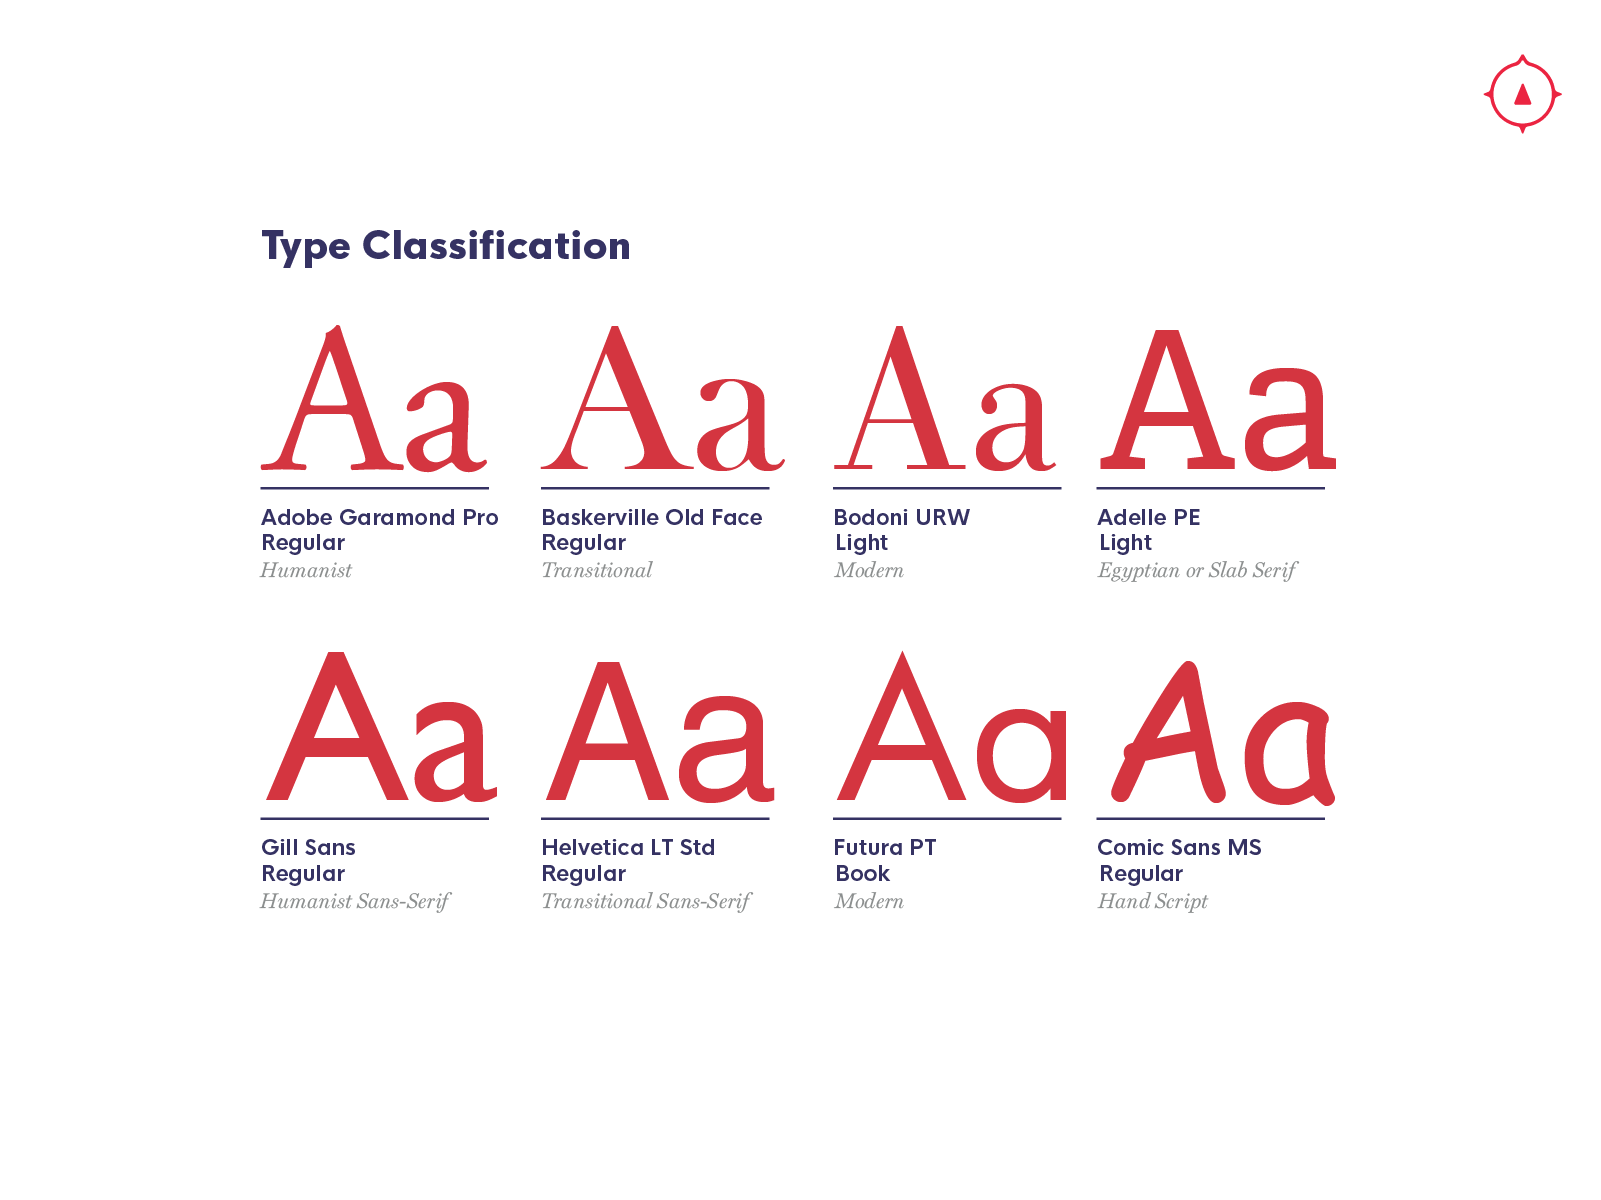 when creating a professional presentation how many typefaces are recommended